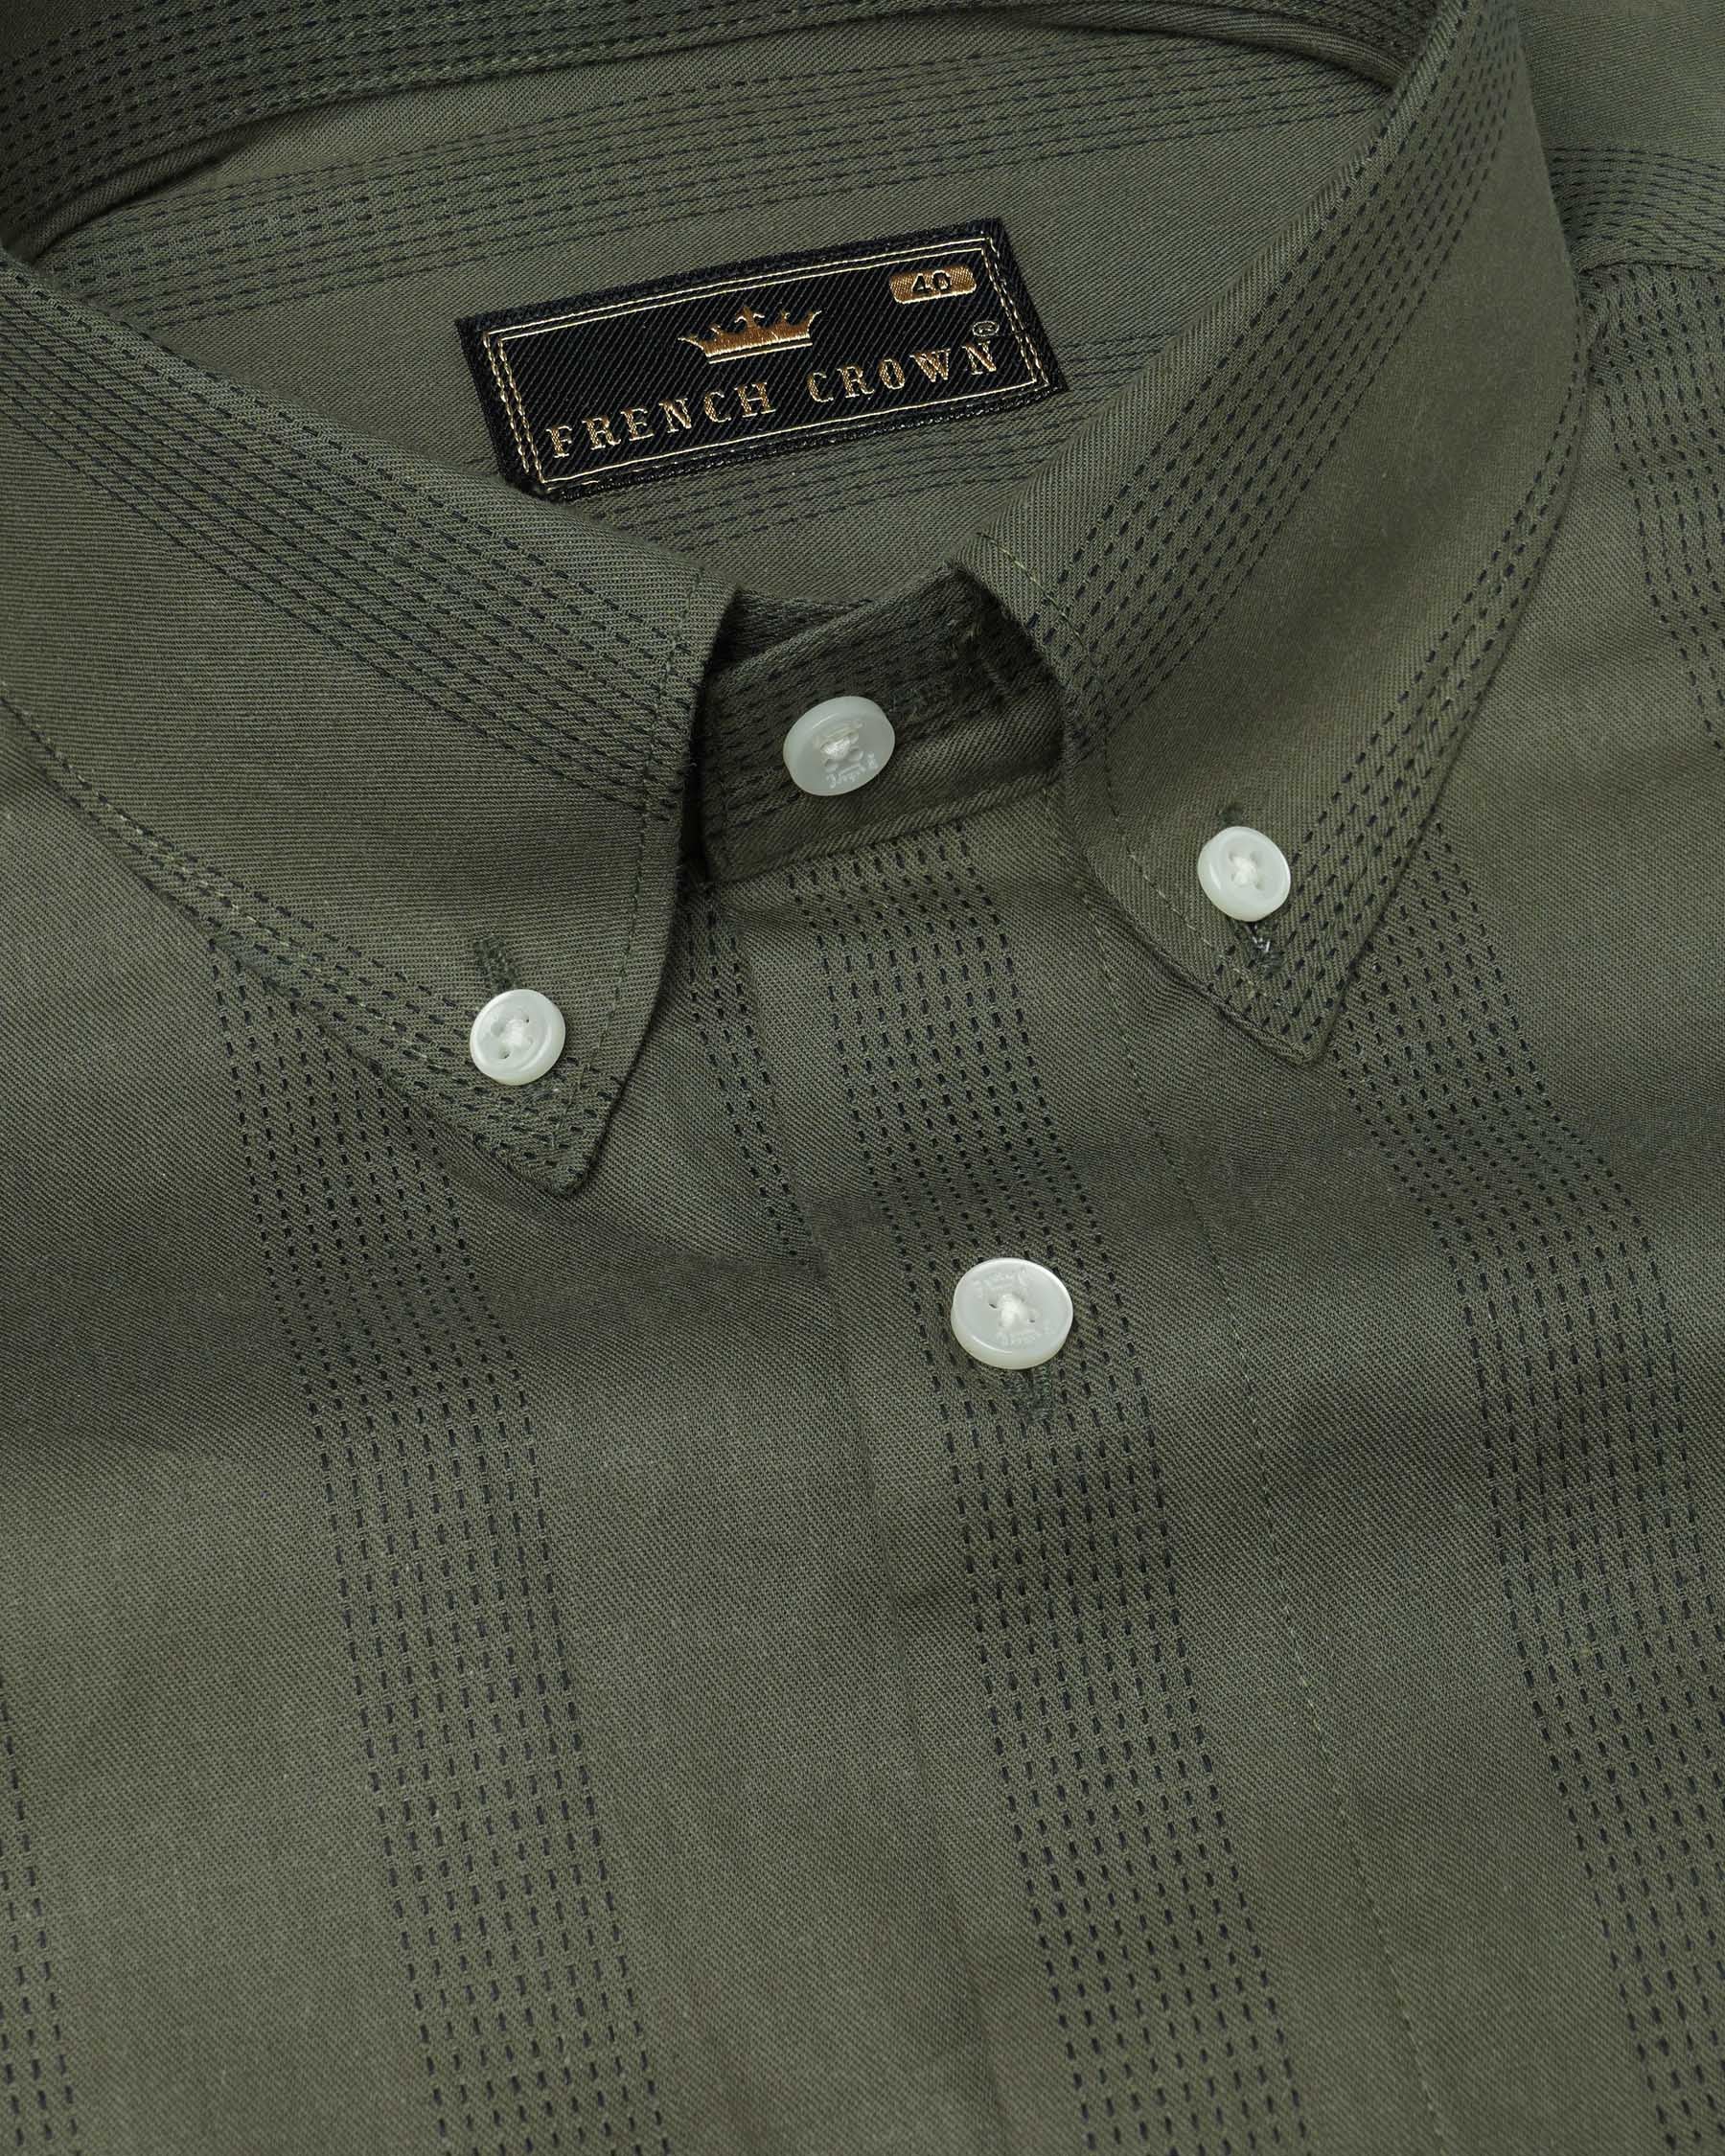 Kelp Green with Black Implied Lined Twill Premium Cotton Shirt 7570-BD-38, 7570-BD-H-38, 7570-BD-39, 7570-BD-H-39, 7570-BD-40, 7570-BD-H-40, 7570-BD-42, 7570-BD-H-42, 7570-BD-44, 7570-BD-H-44, 7570-BD-46, 7570-BD-H-46, 7570-BD-48, 7570-BD-H-48, 7570-BD-50, 7570-BD-H-50, 7570-BD-52, 7570-BD-H-52